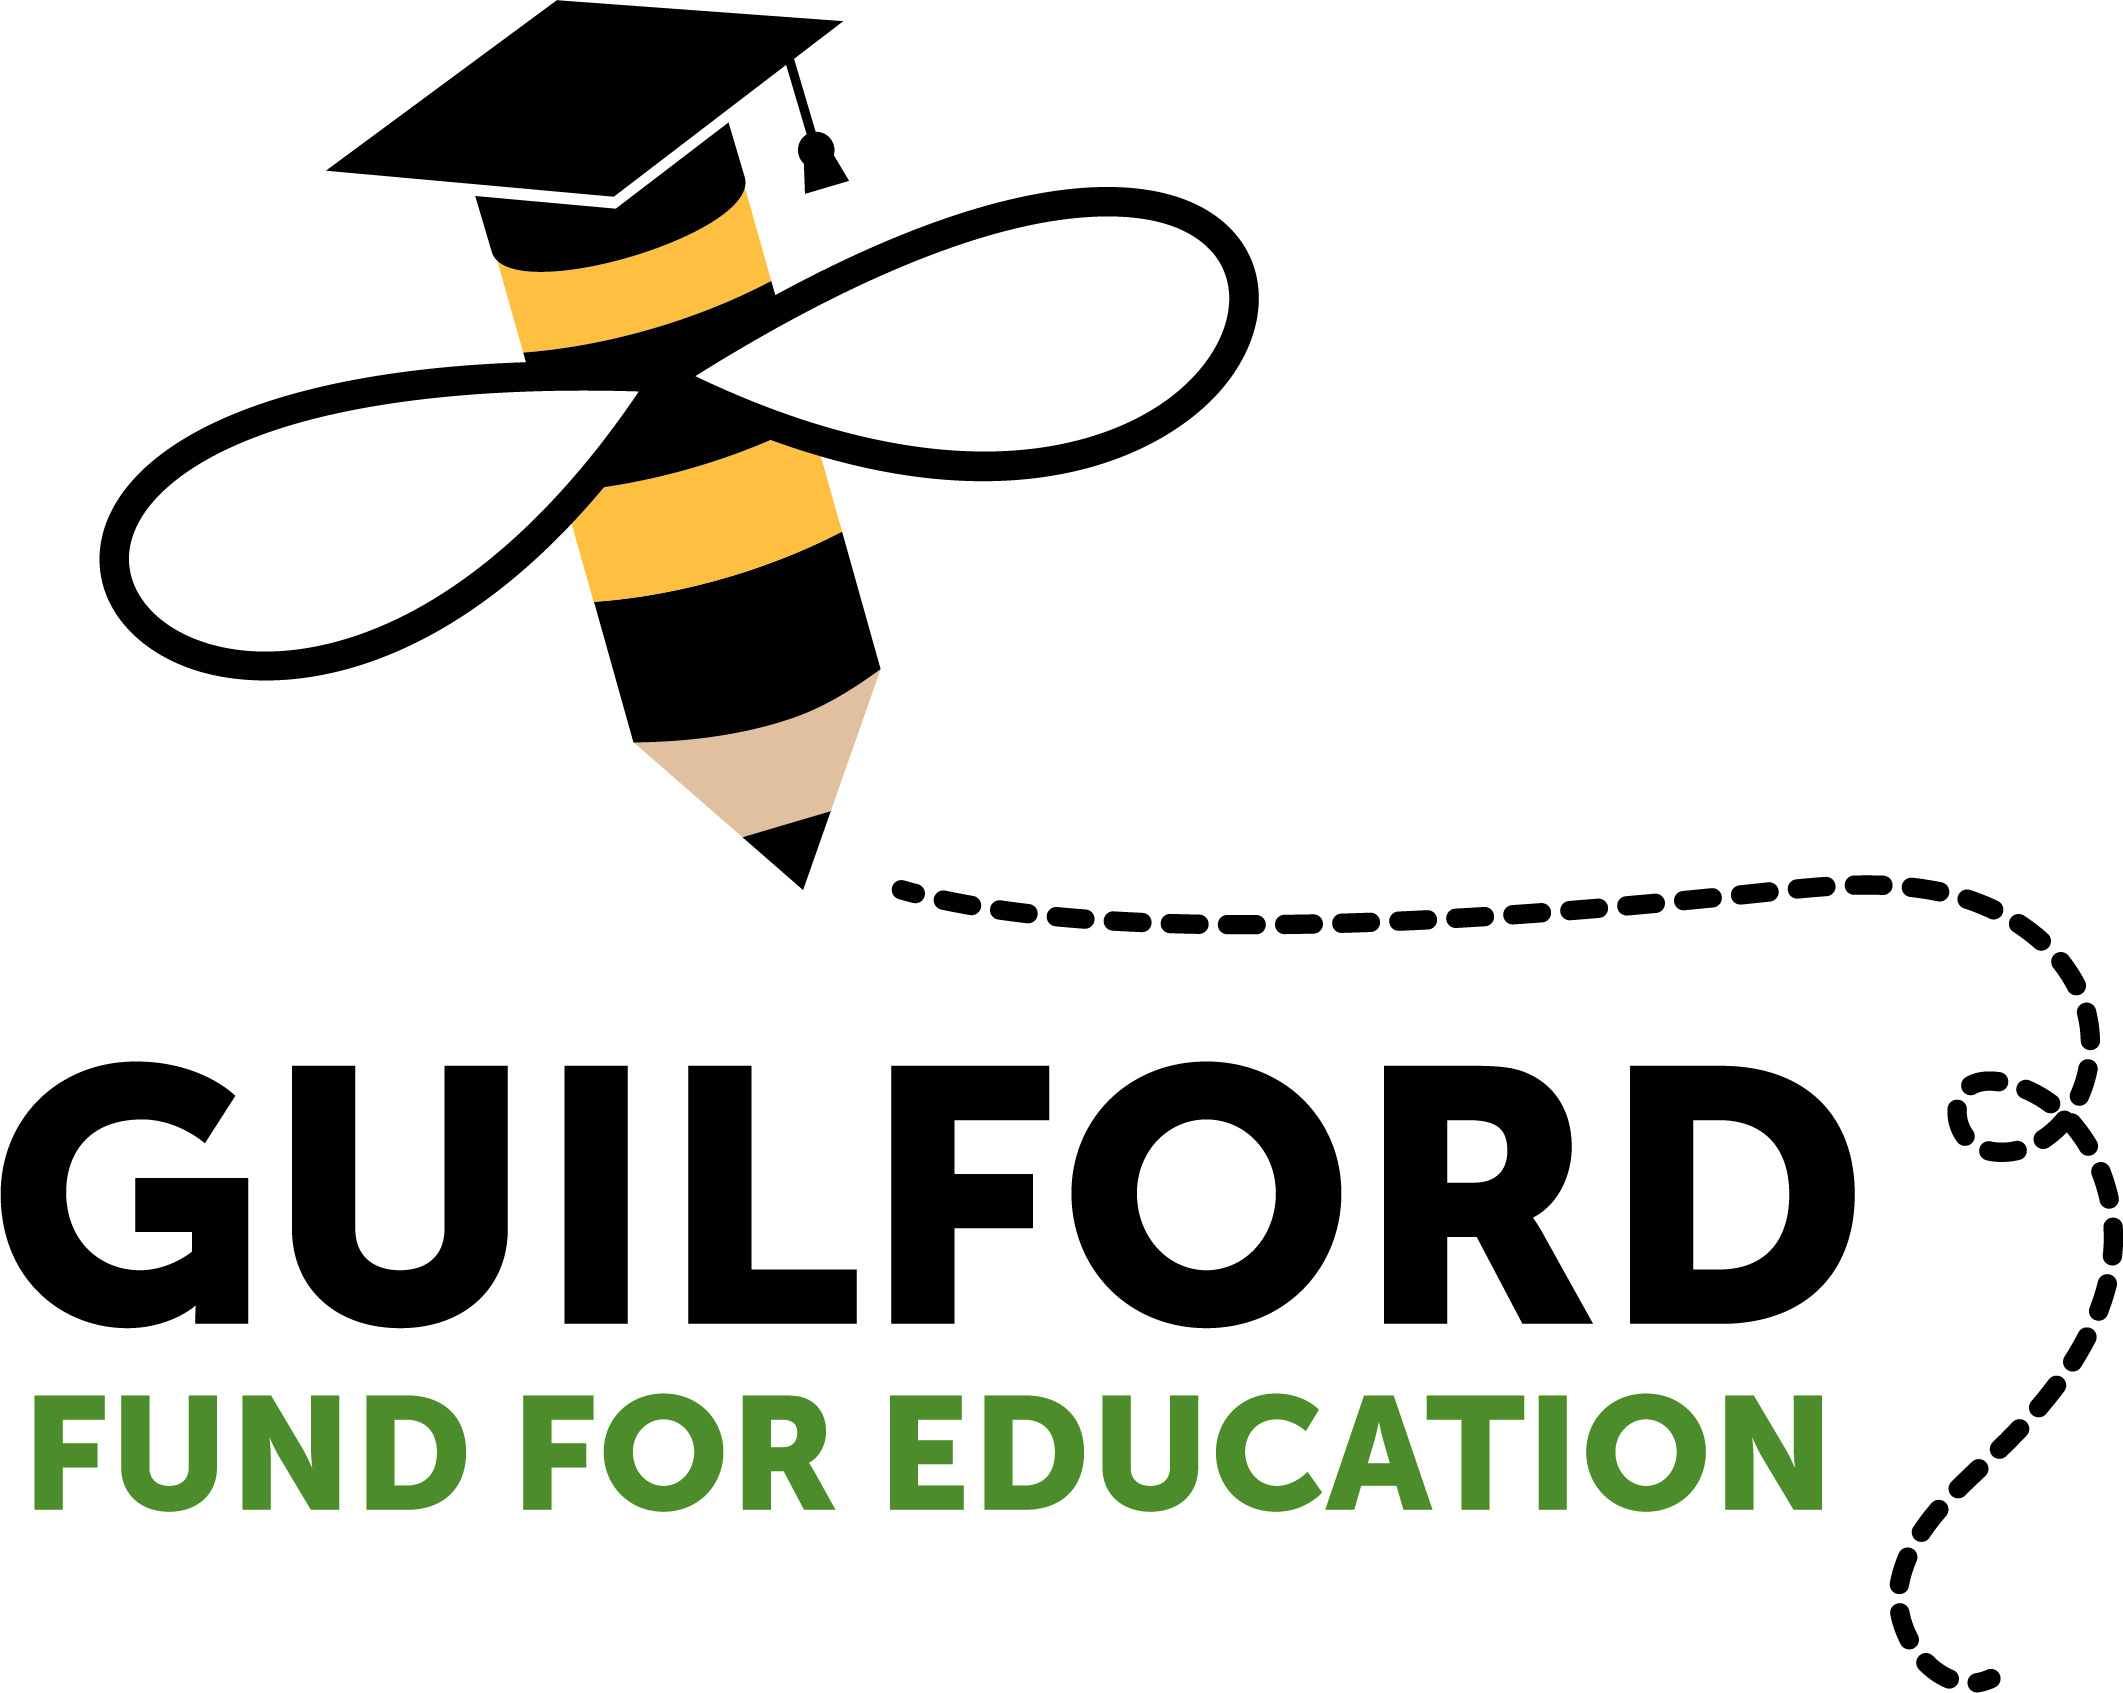 Guilford Fund for Education